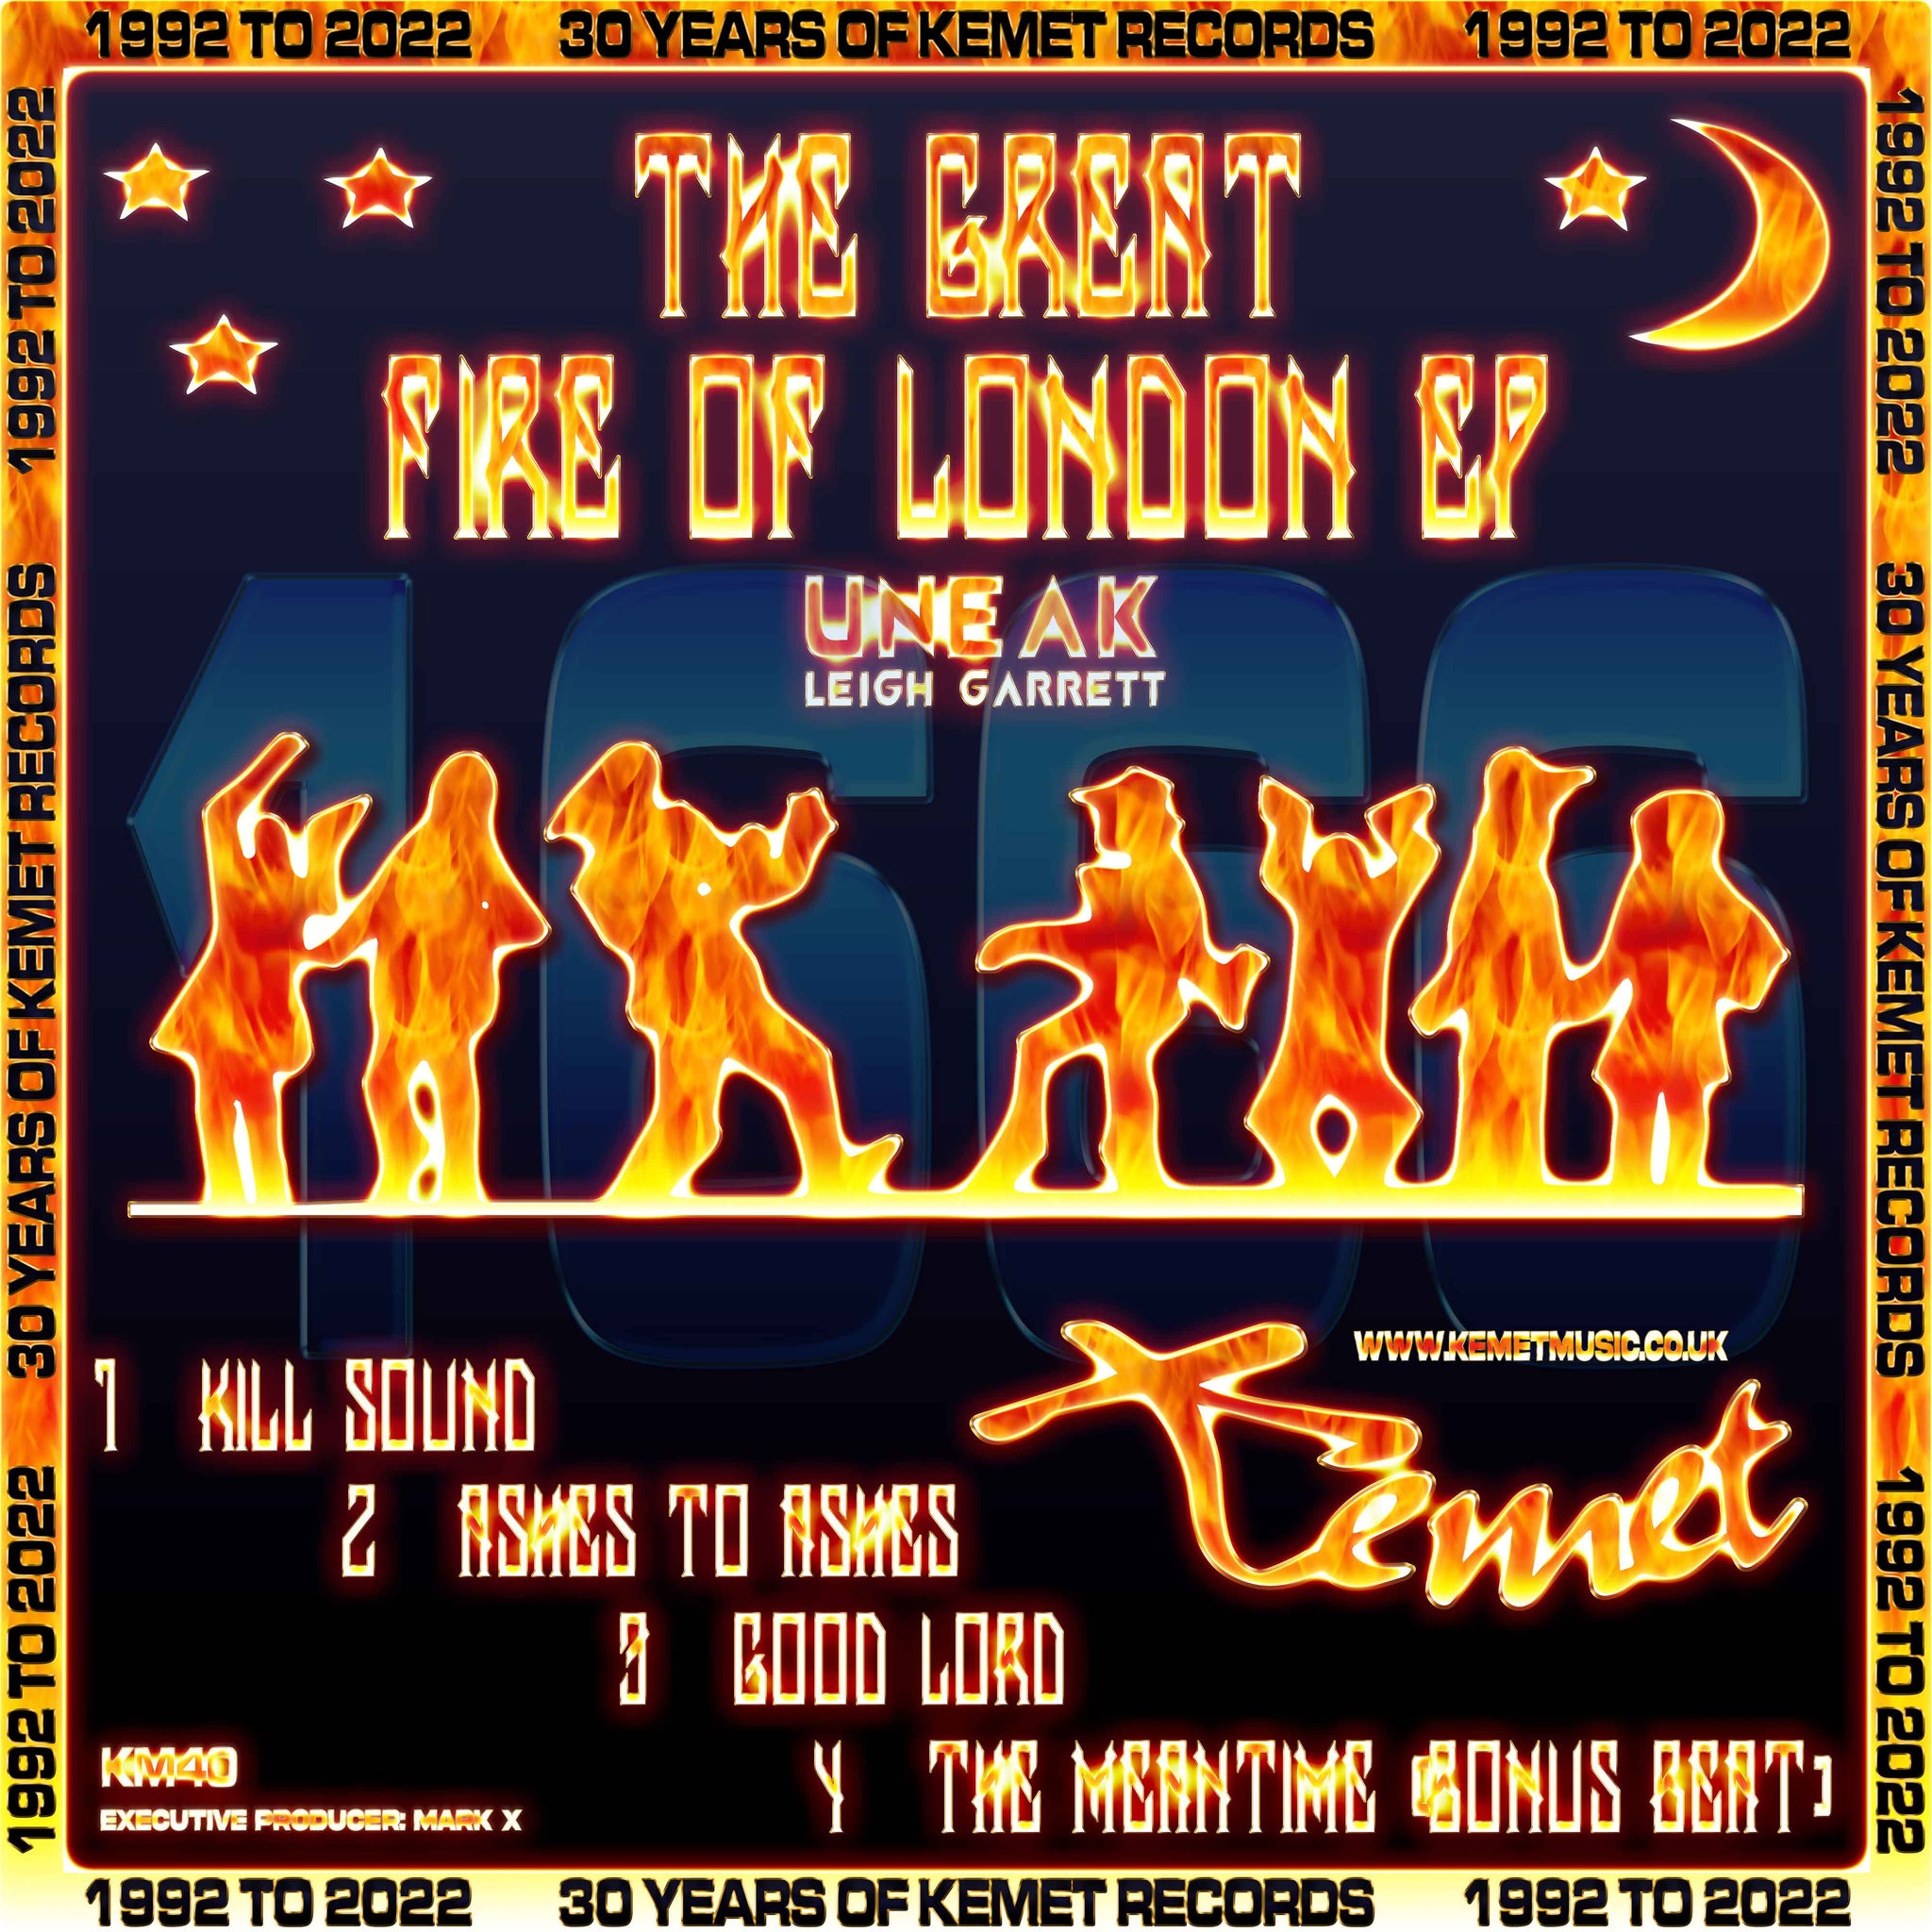 Uneak - 1666 The Great Fire Of London EP